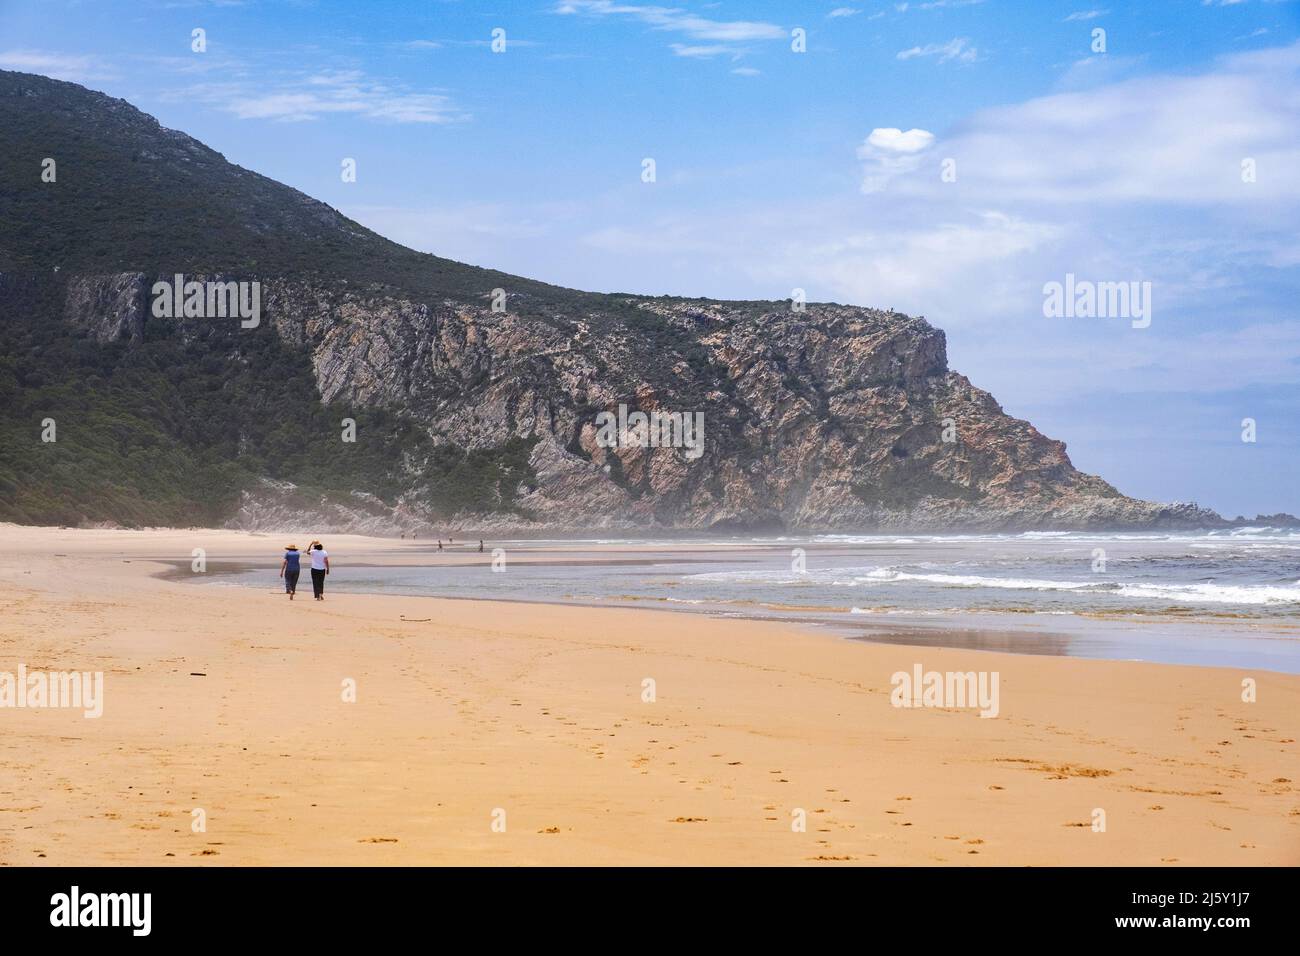 Tourists walking on Nature's Valley sandy beach in the Tsitsikamma Section of the Garden Route National Park, De Vasselot, Western Cape, South Africa Stock Photo